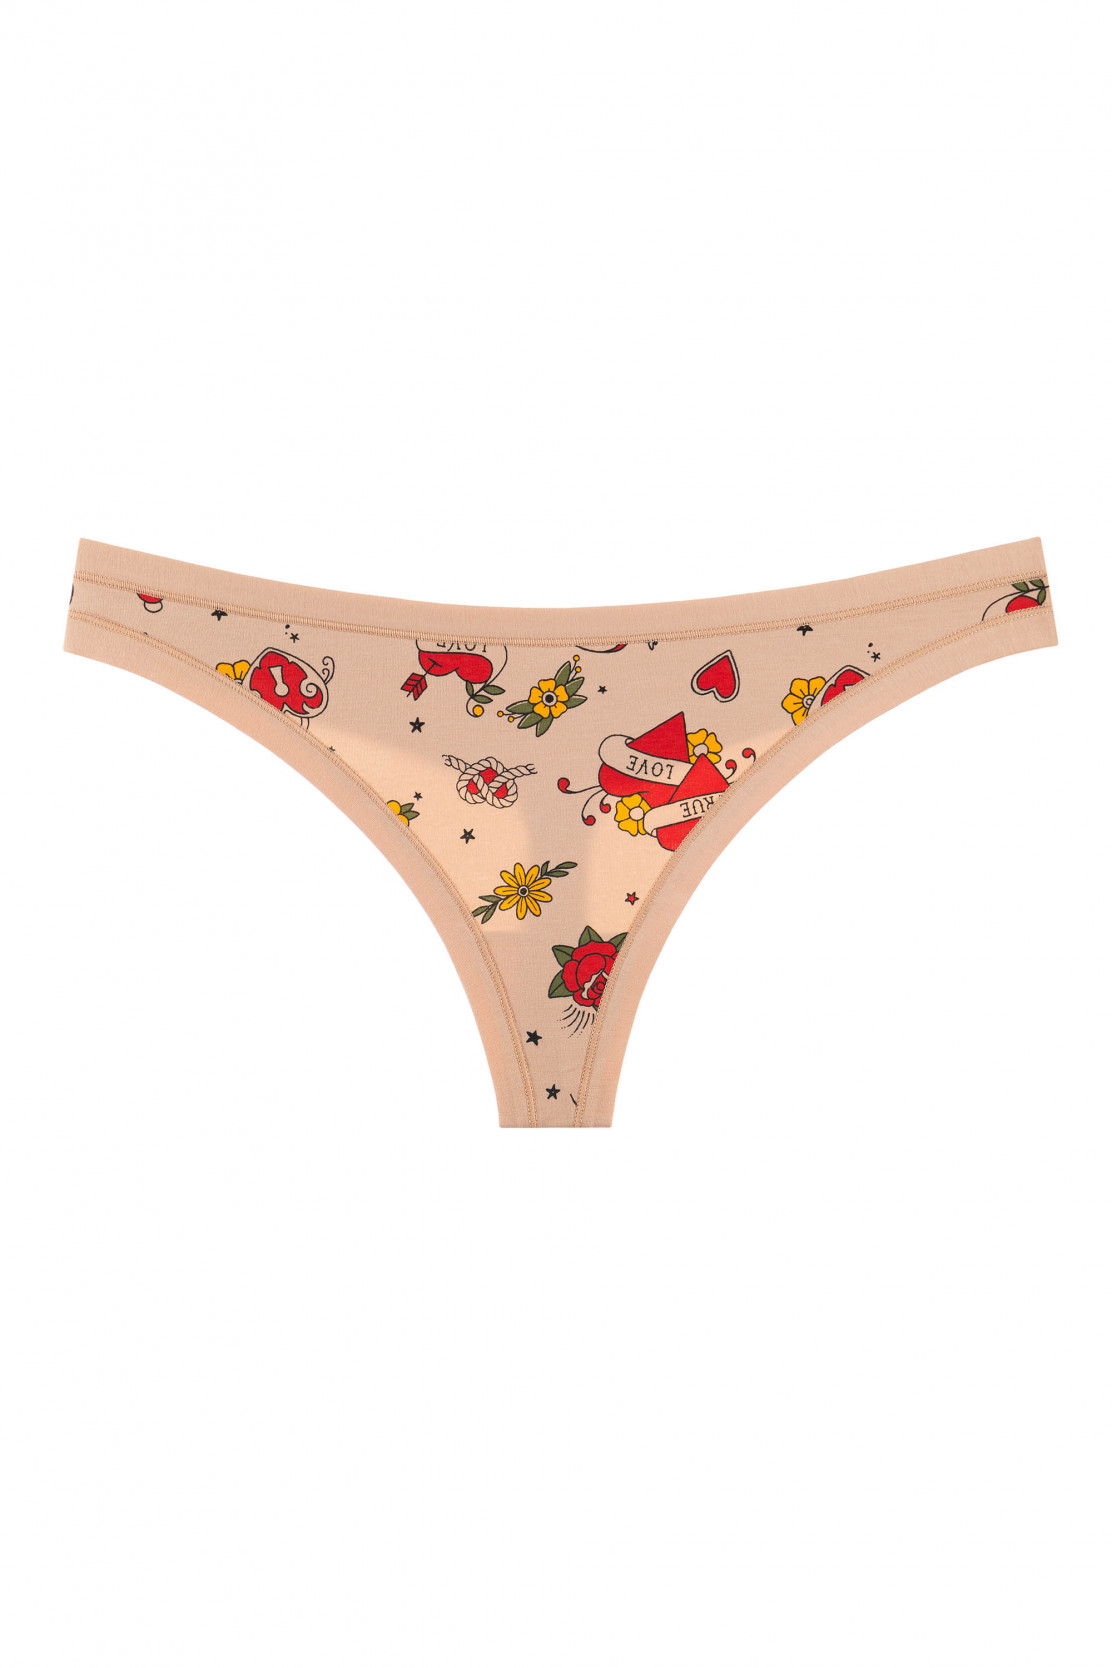 2202-12 Thong Panty (1 pc) 271 (beige) buy at the best price in